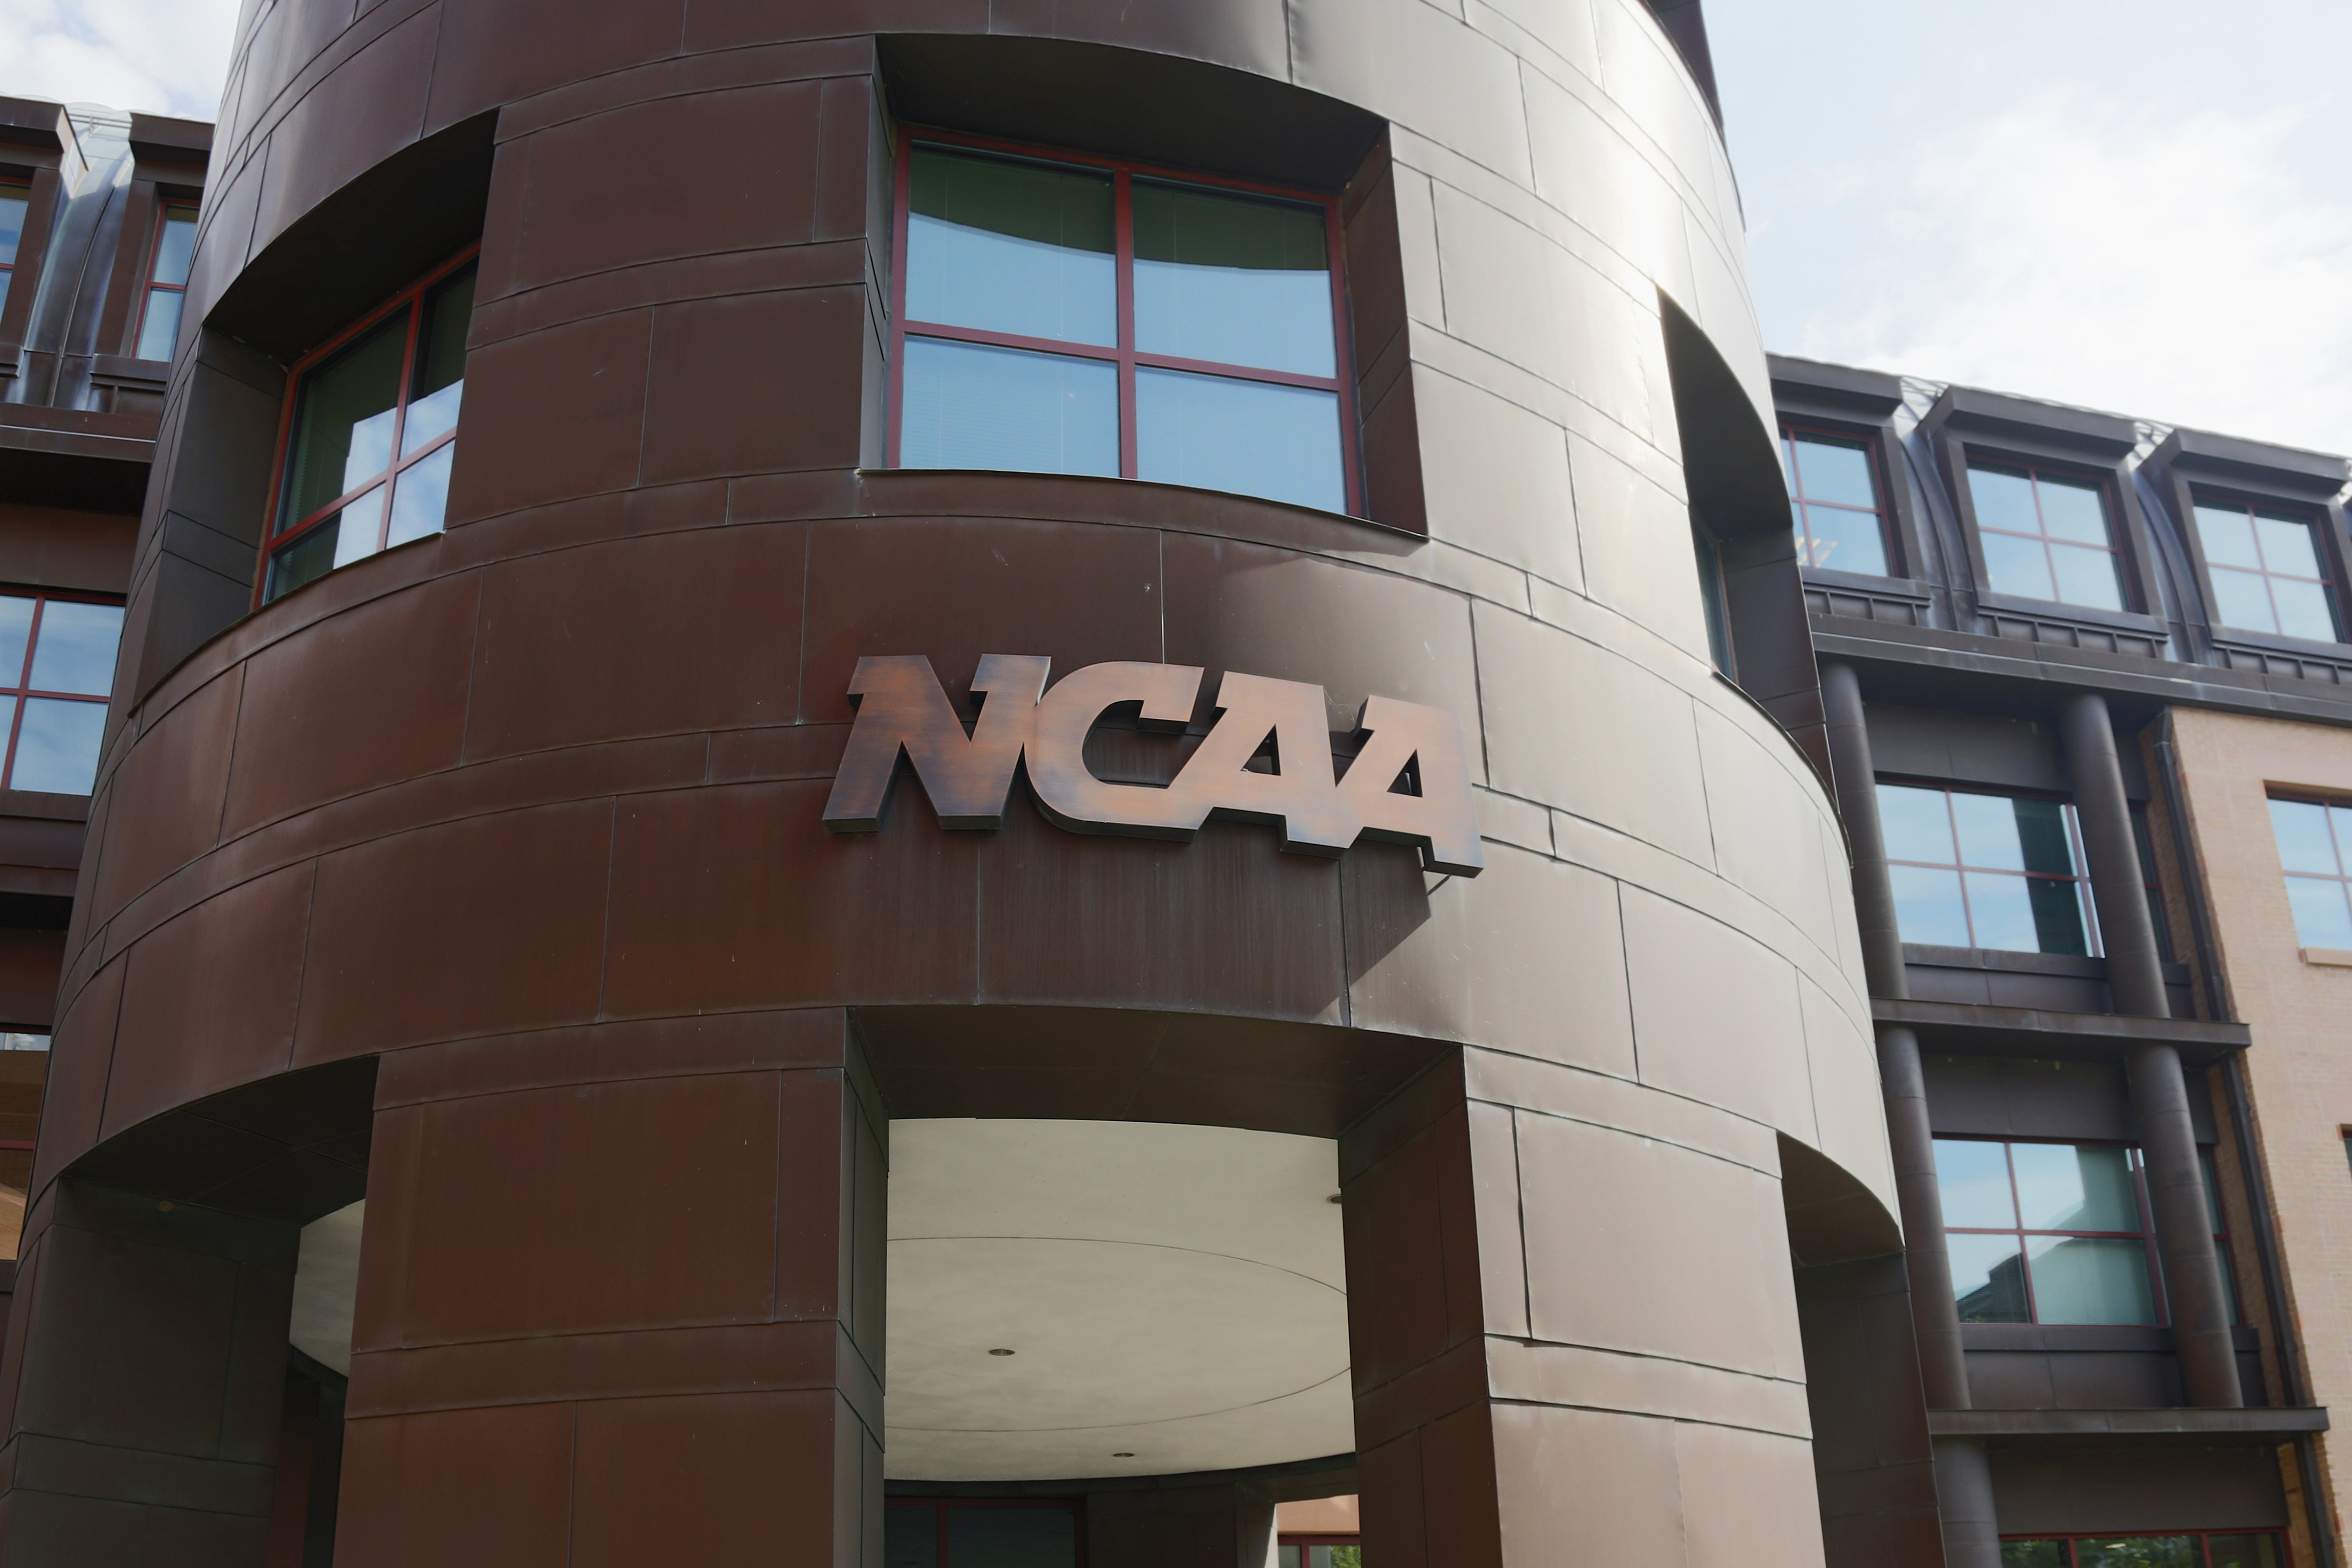 Growing 'stratification' of NCAA conferences concerns less wealthy